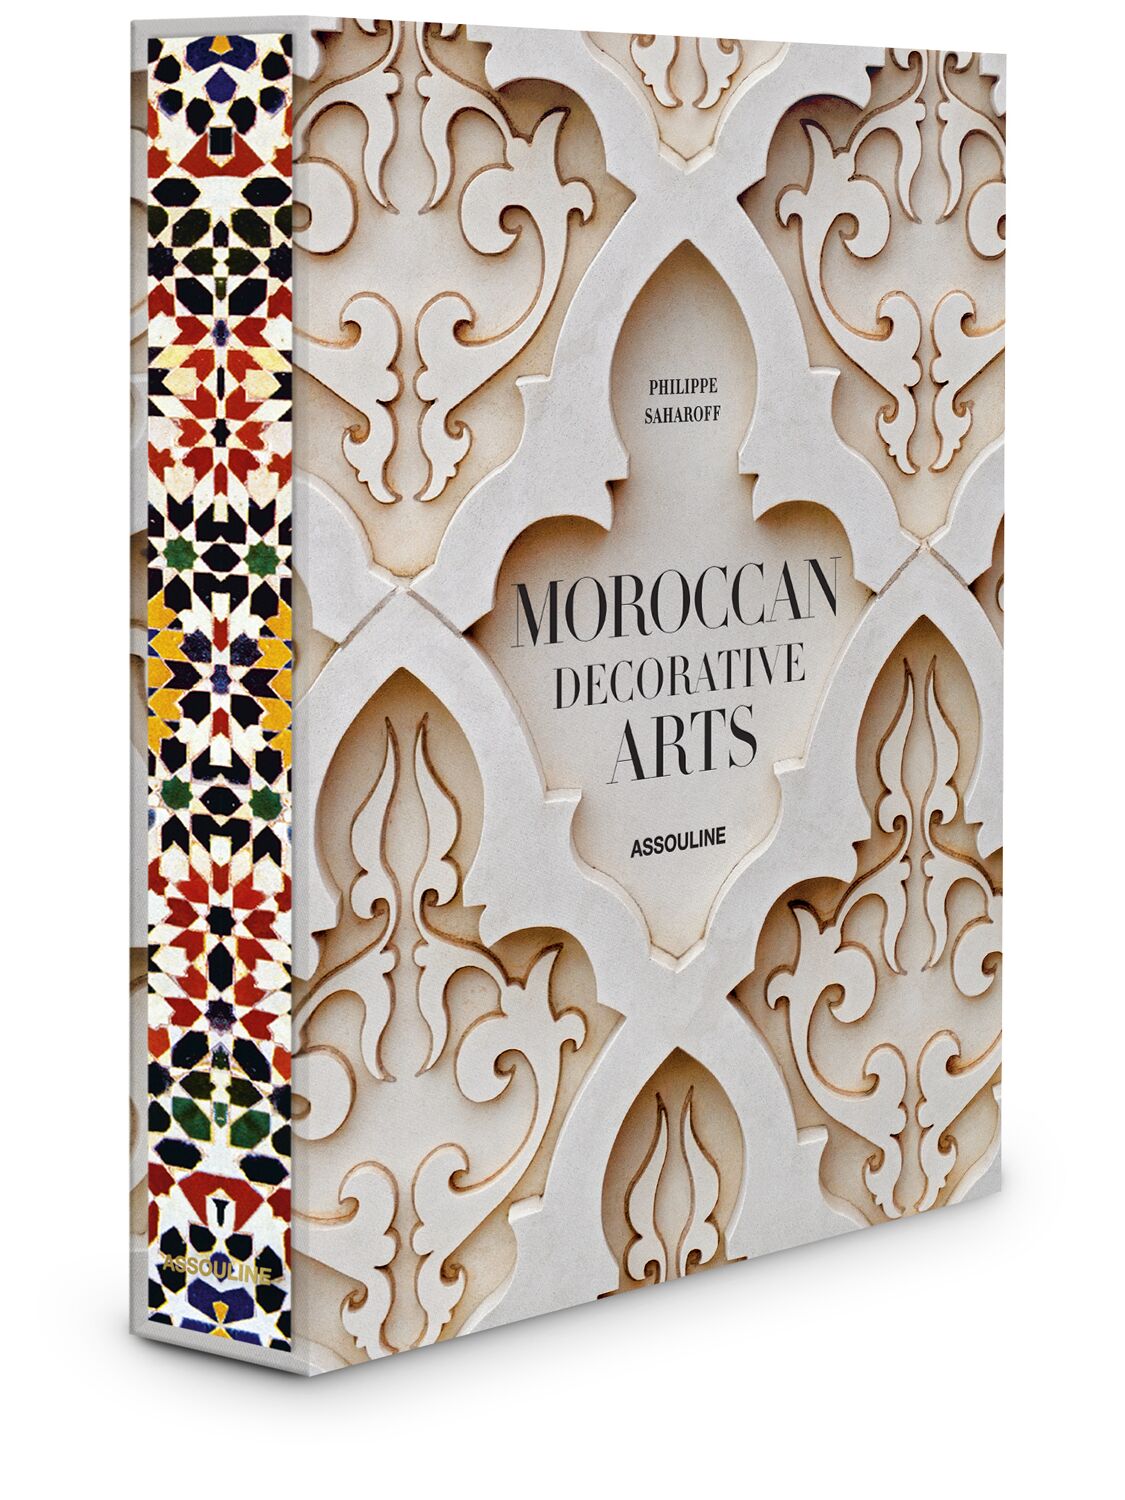 Assouline Moroccan Decorative Arts By Philippe Saharoff Hardcover Book In Beige